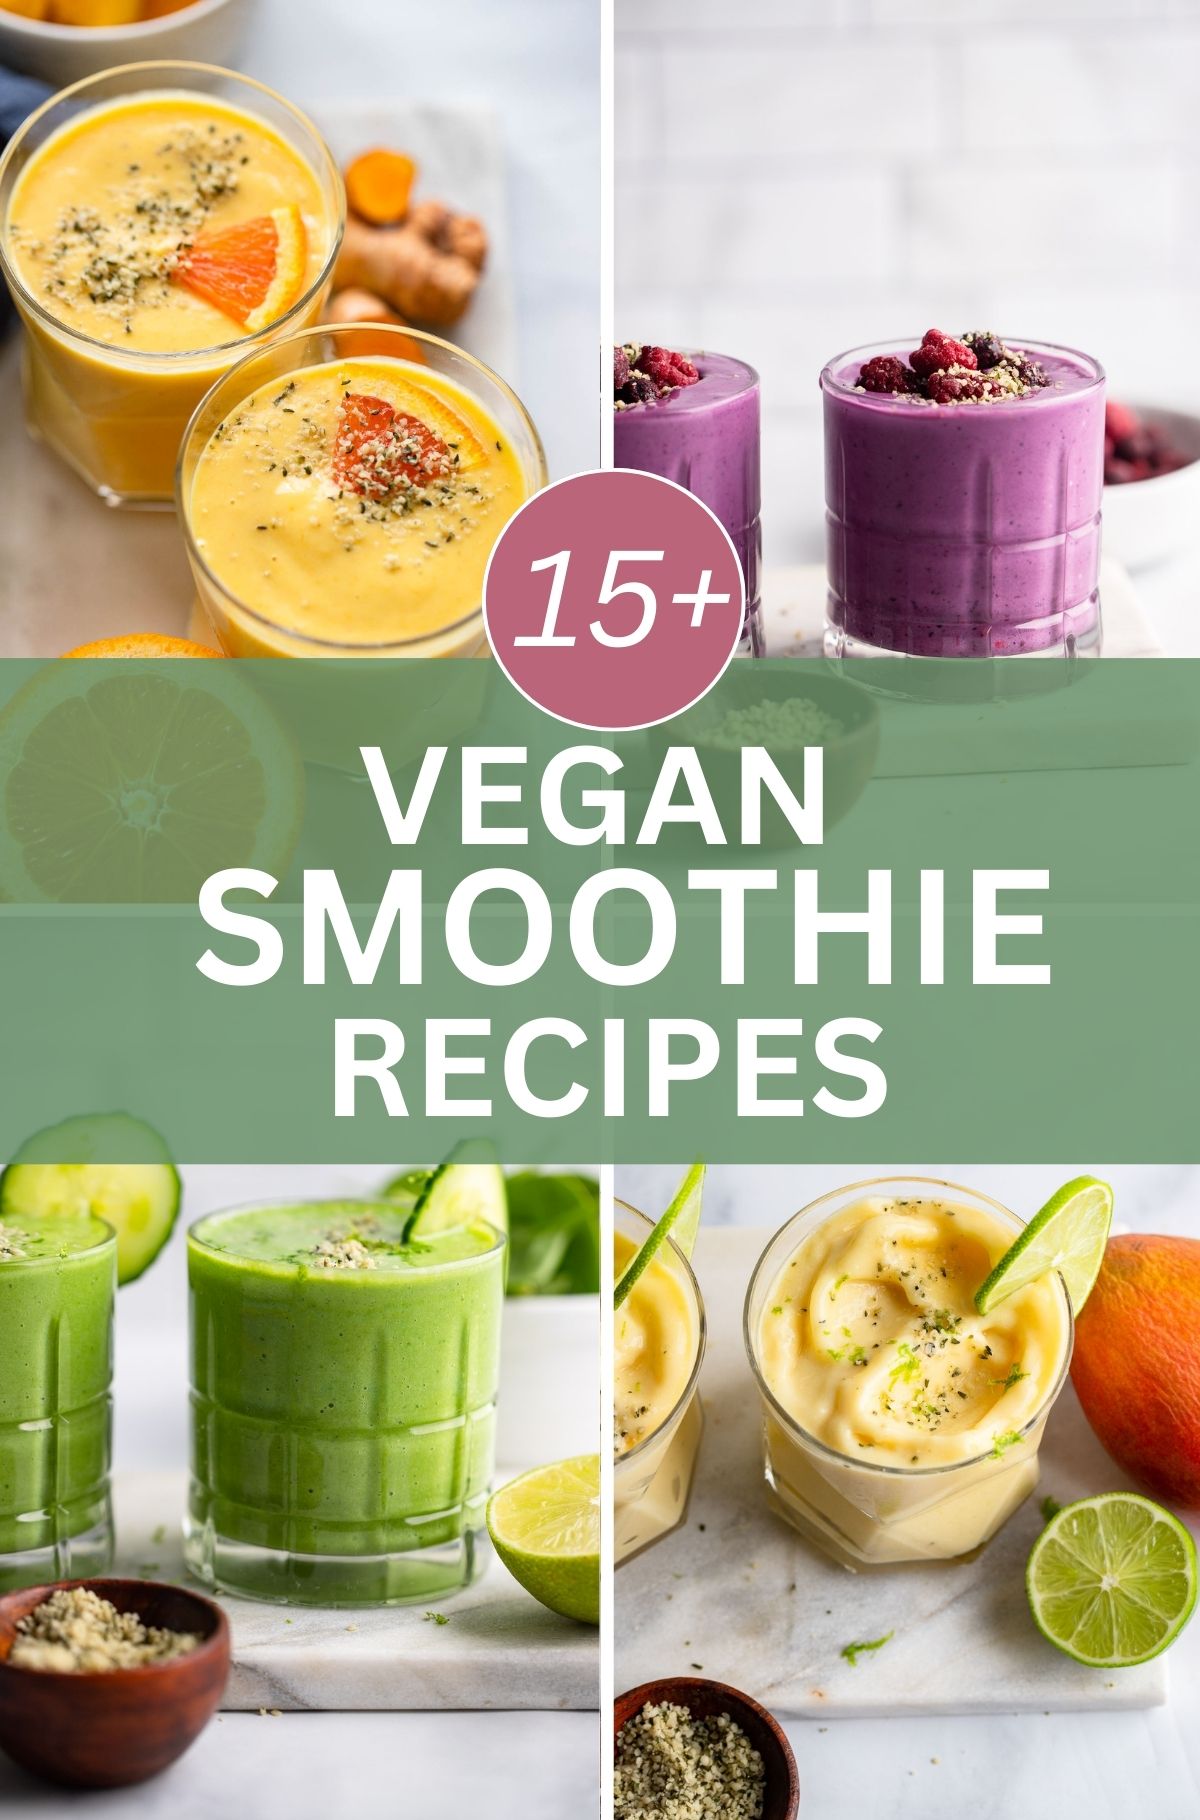 vegan smoothie recipe collage with 4 images of smoothies in glasses with text overlay that says 15+ vegan smoothie recipes.